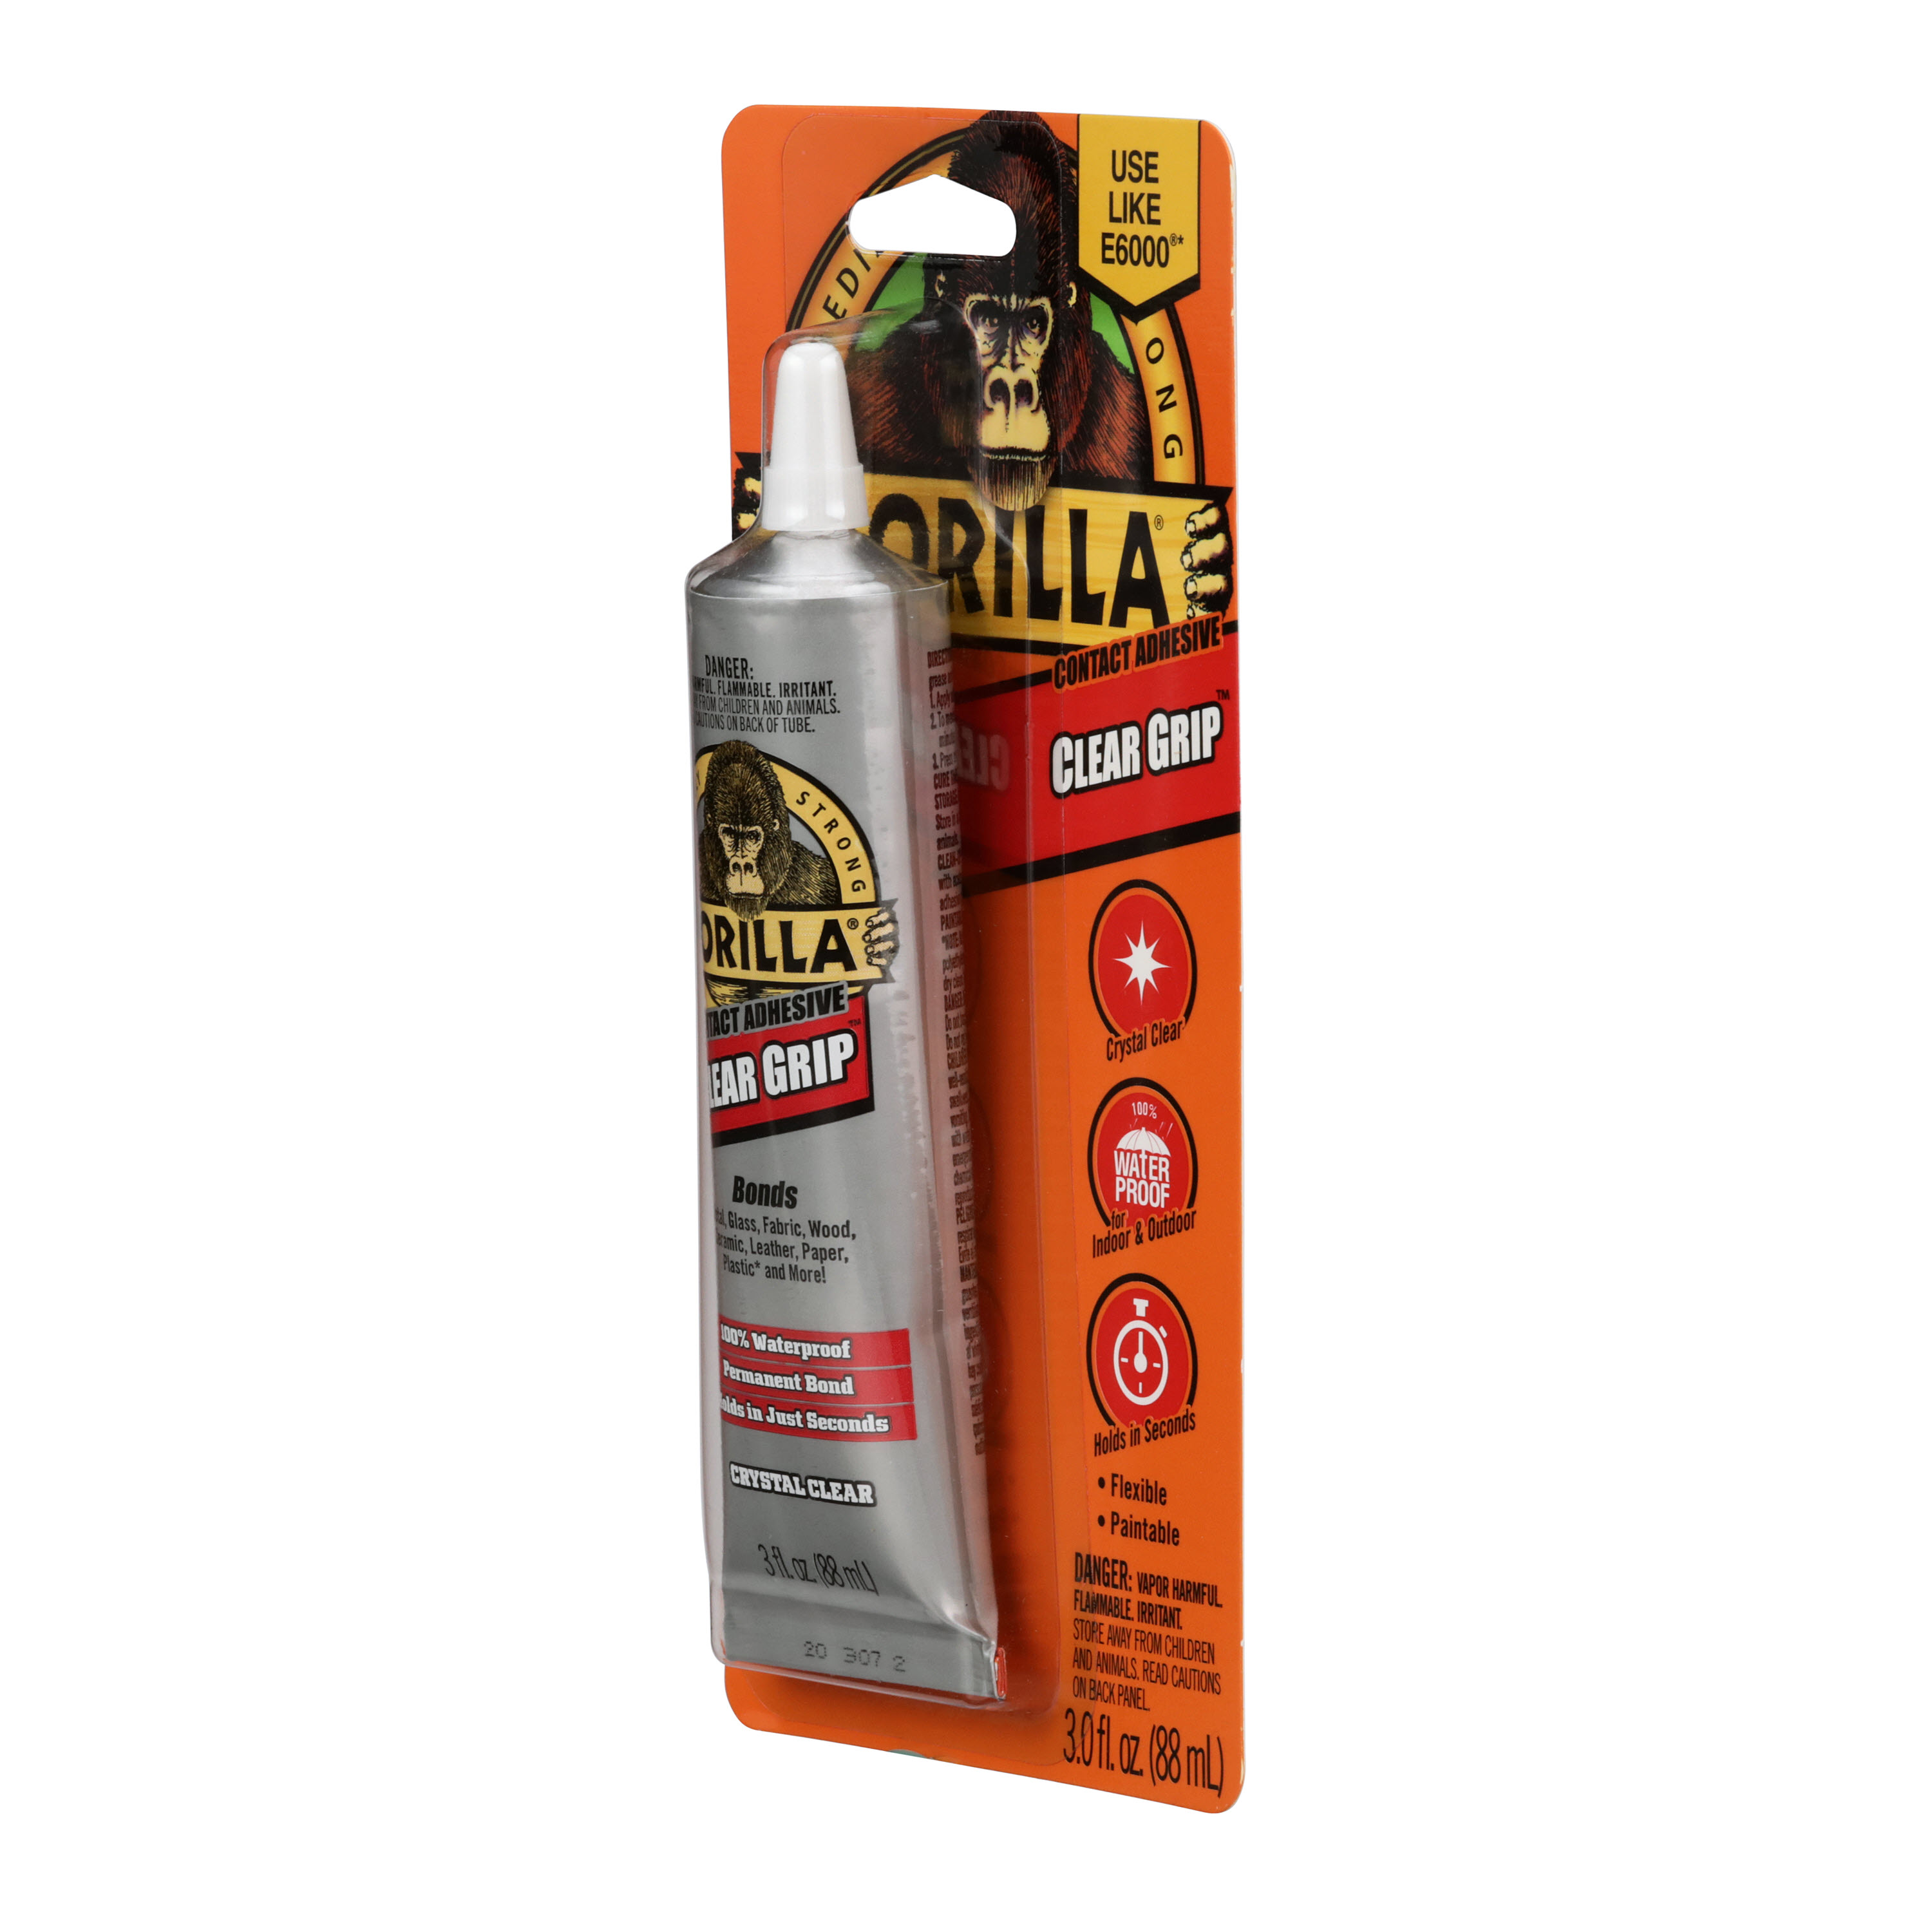 Gorilla Glue Clear Grip Contact Adhesive, 3 Ounce (88mL), Assembled Product  Weight 3 Ounces 